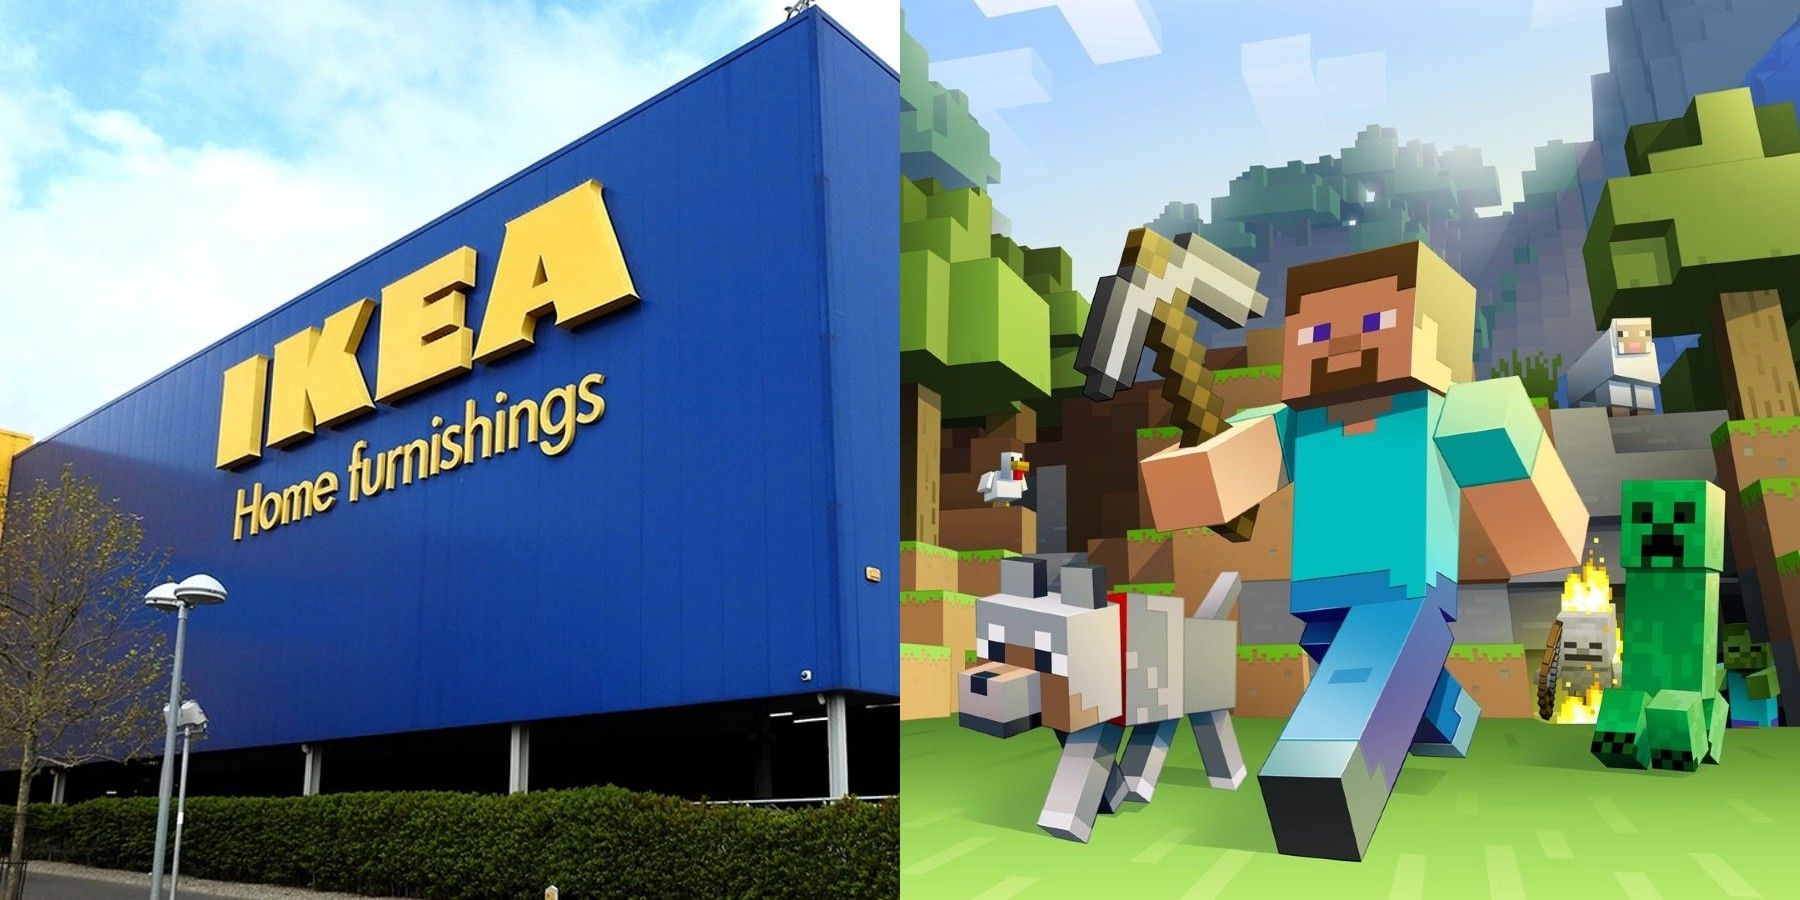 Minecraft Player Tries to Build a Fortress, Accidentally Builds IKEA